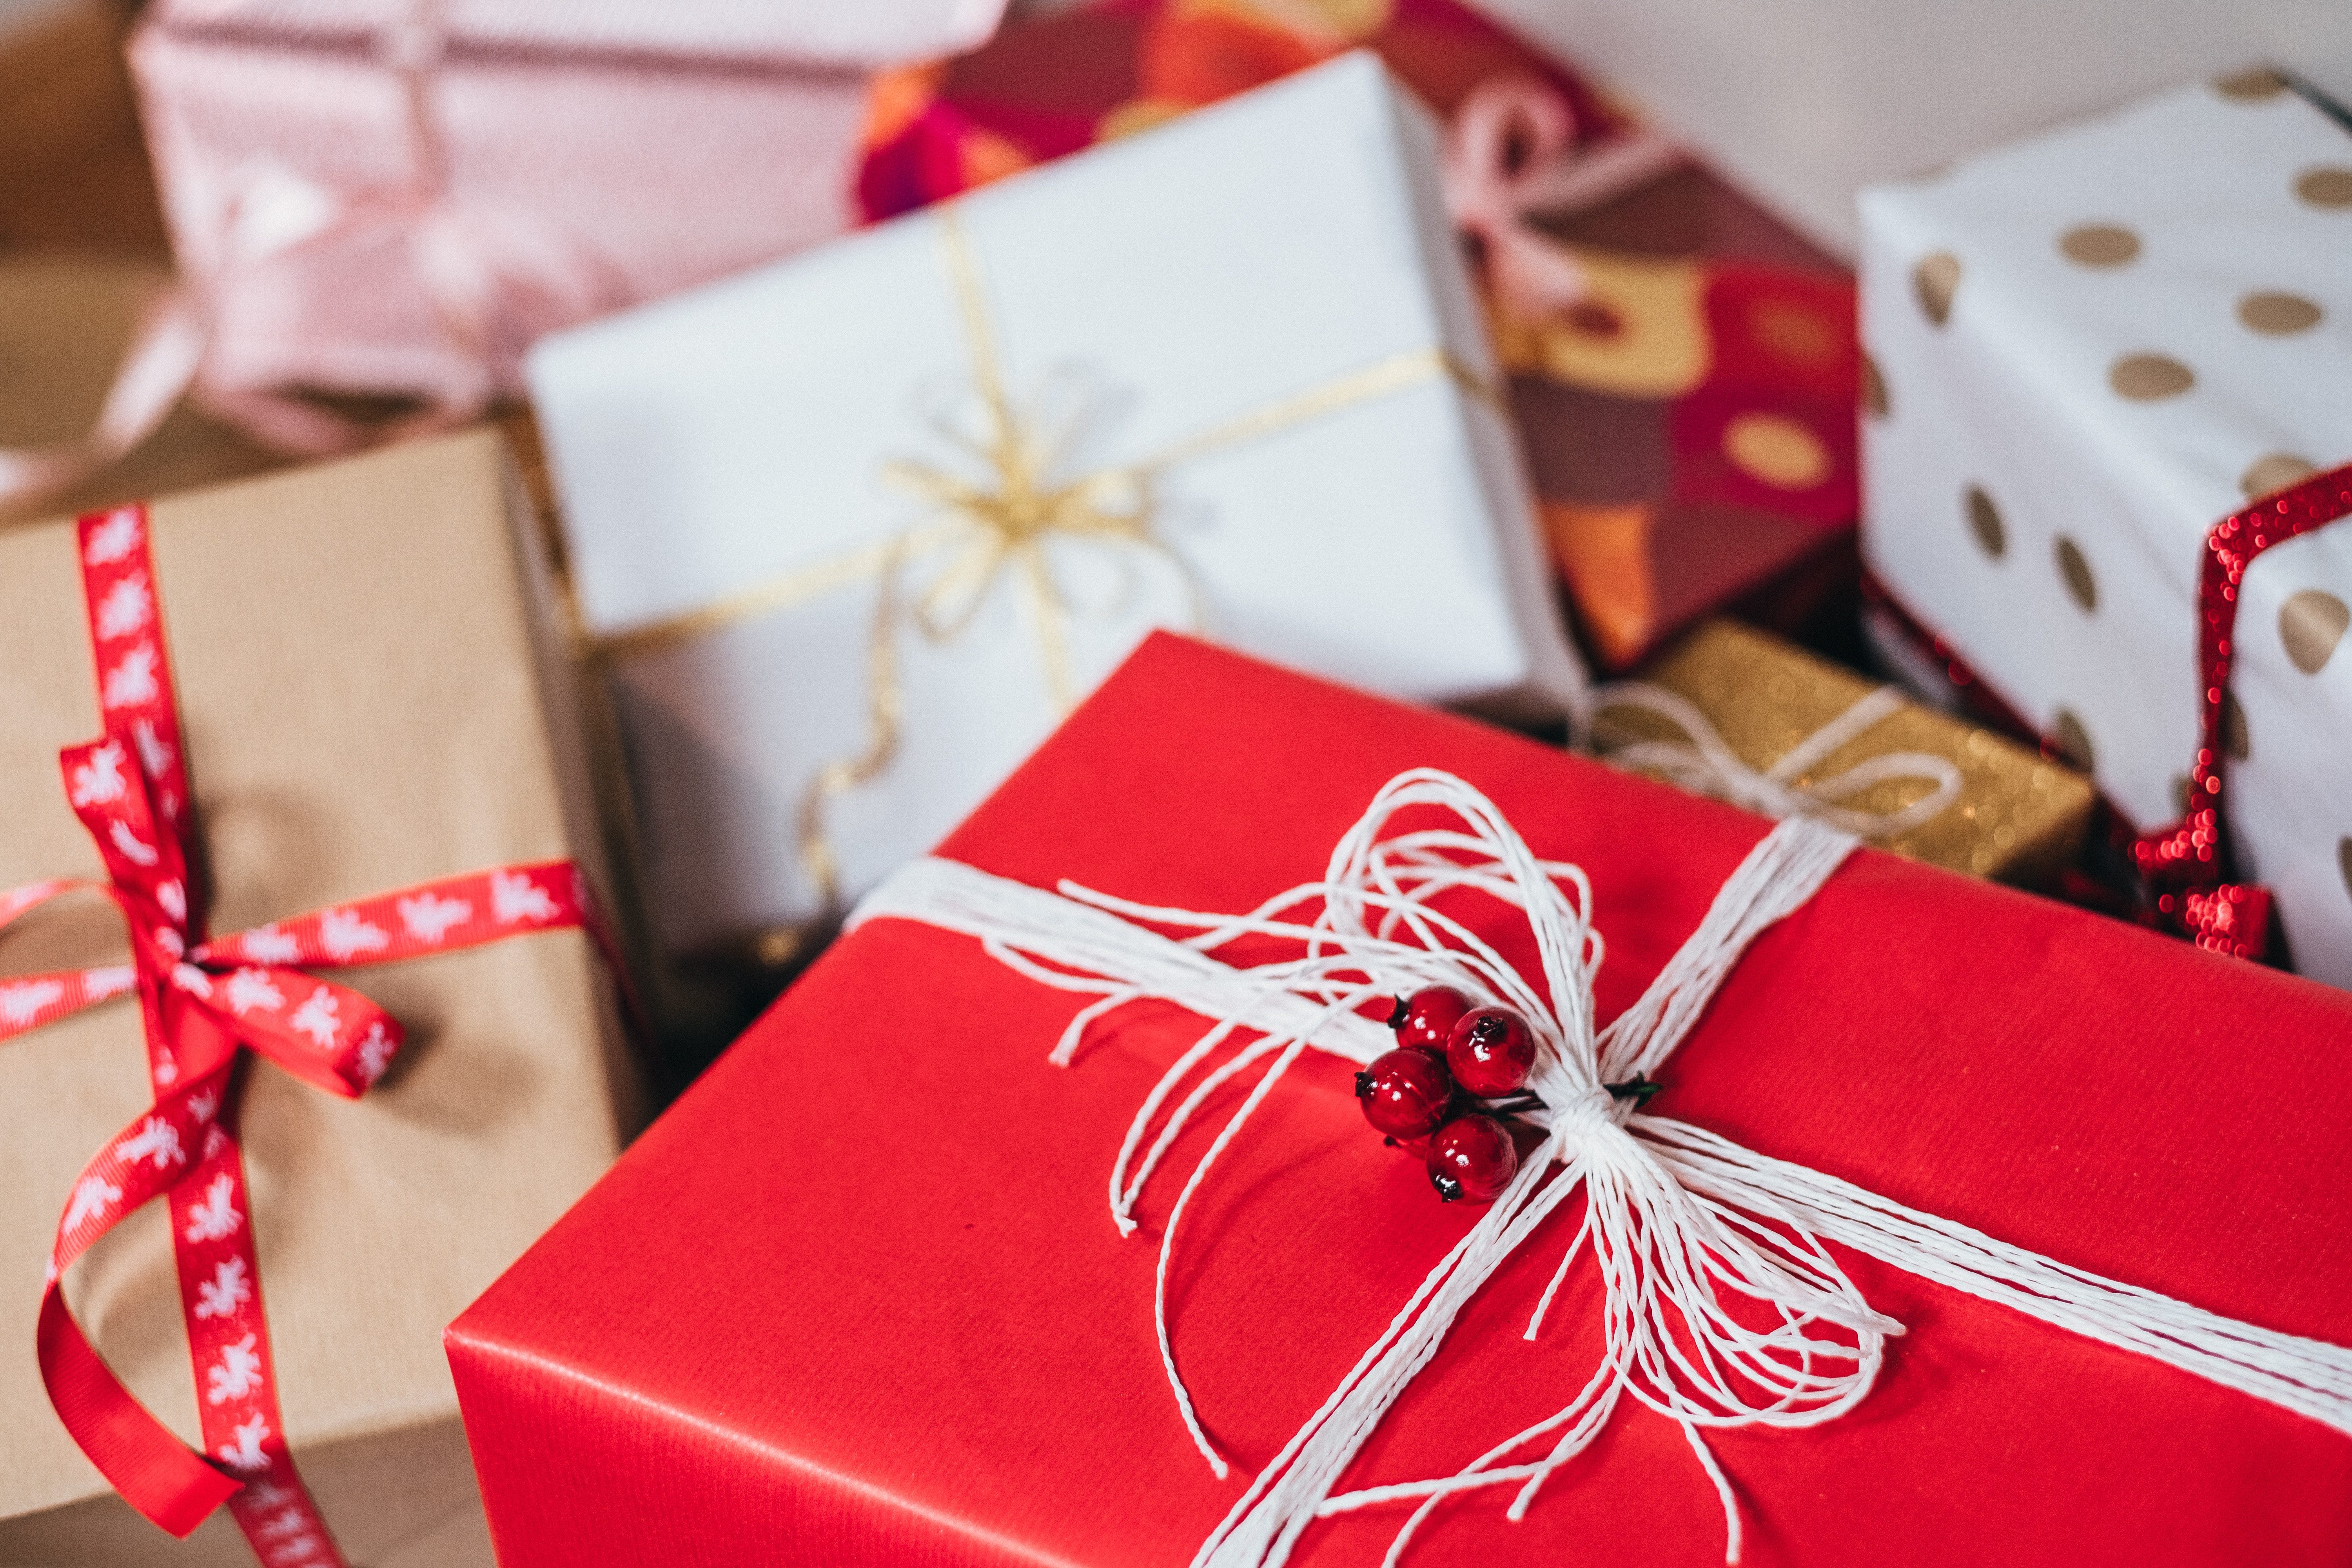 Avoid Back Pain While Holiday Gift Wrapping